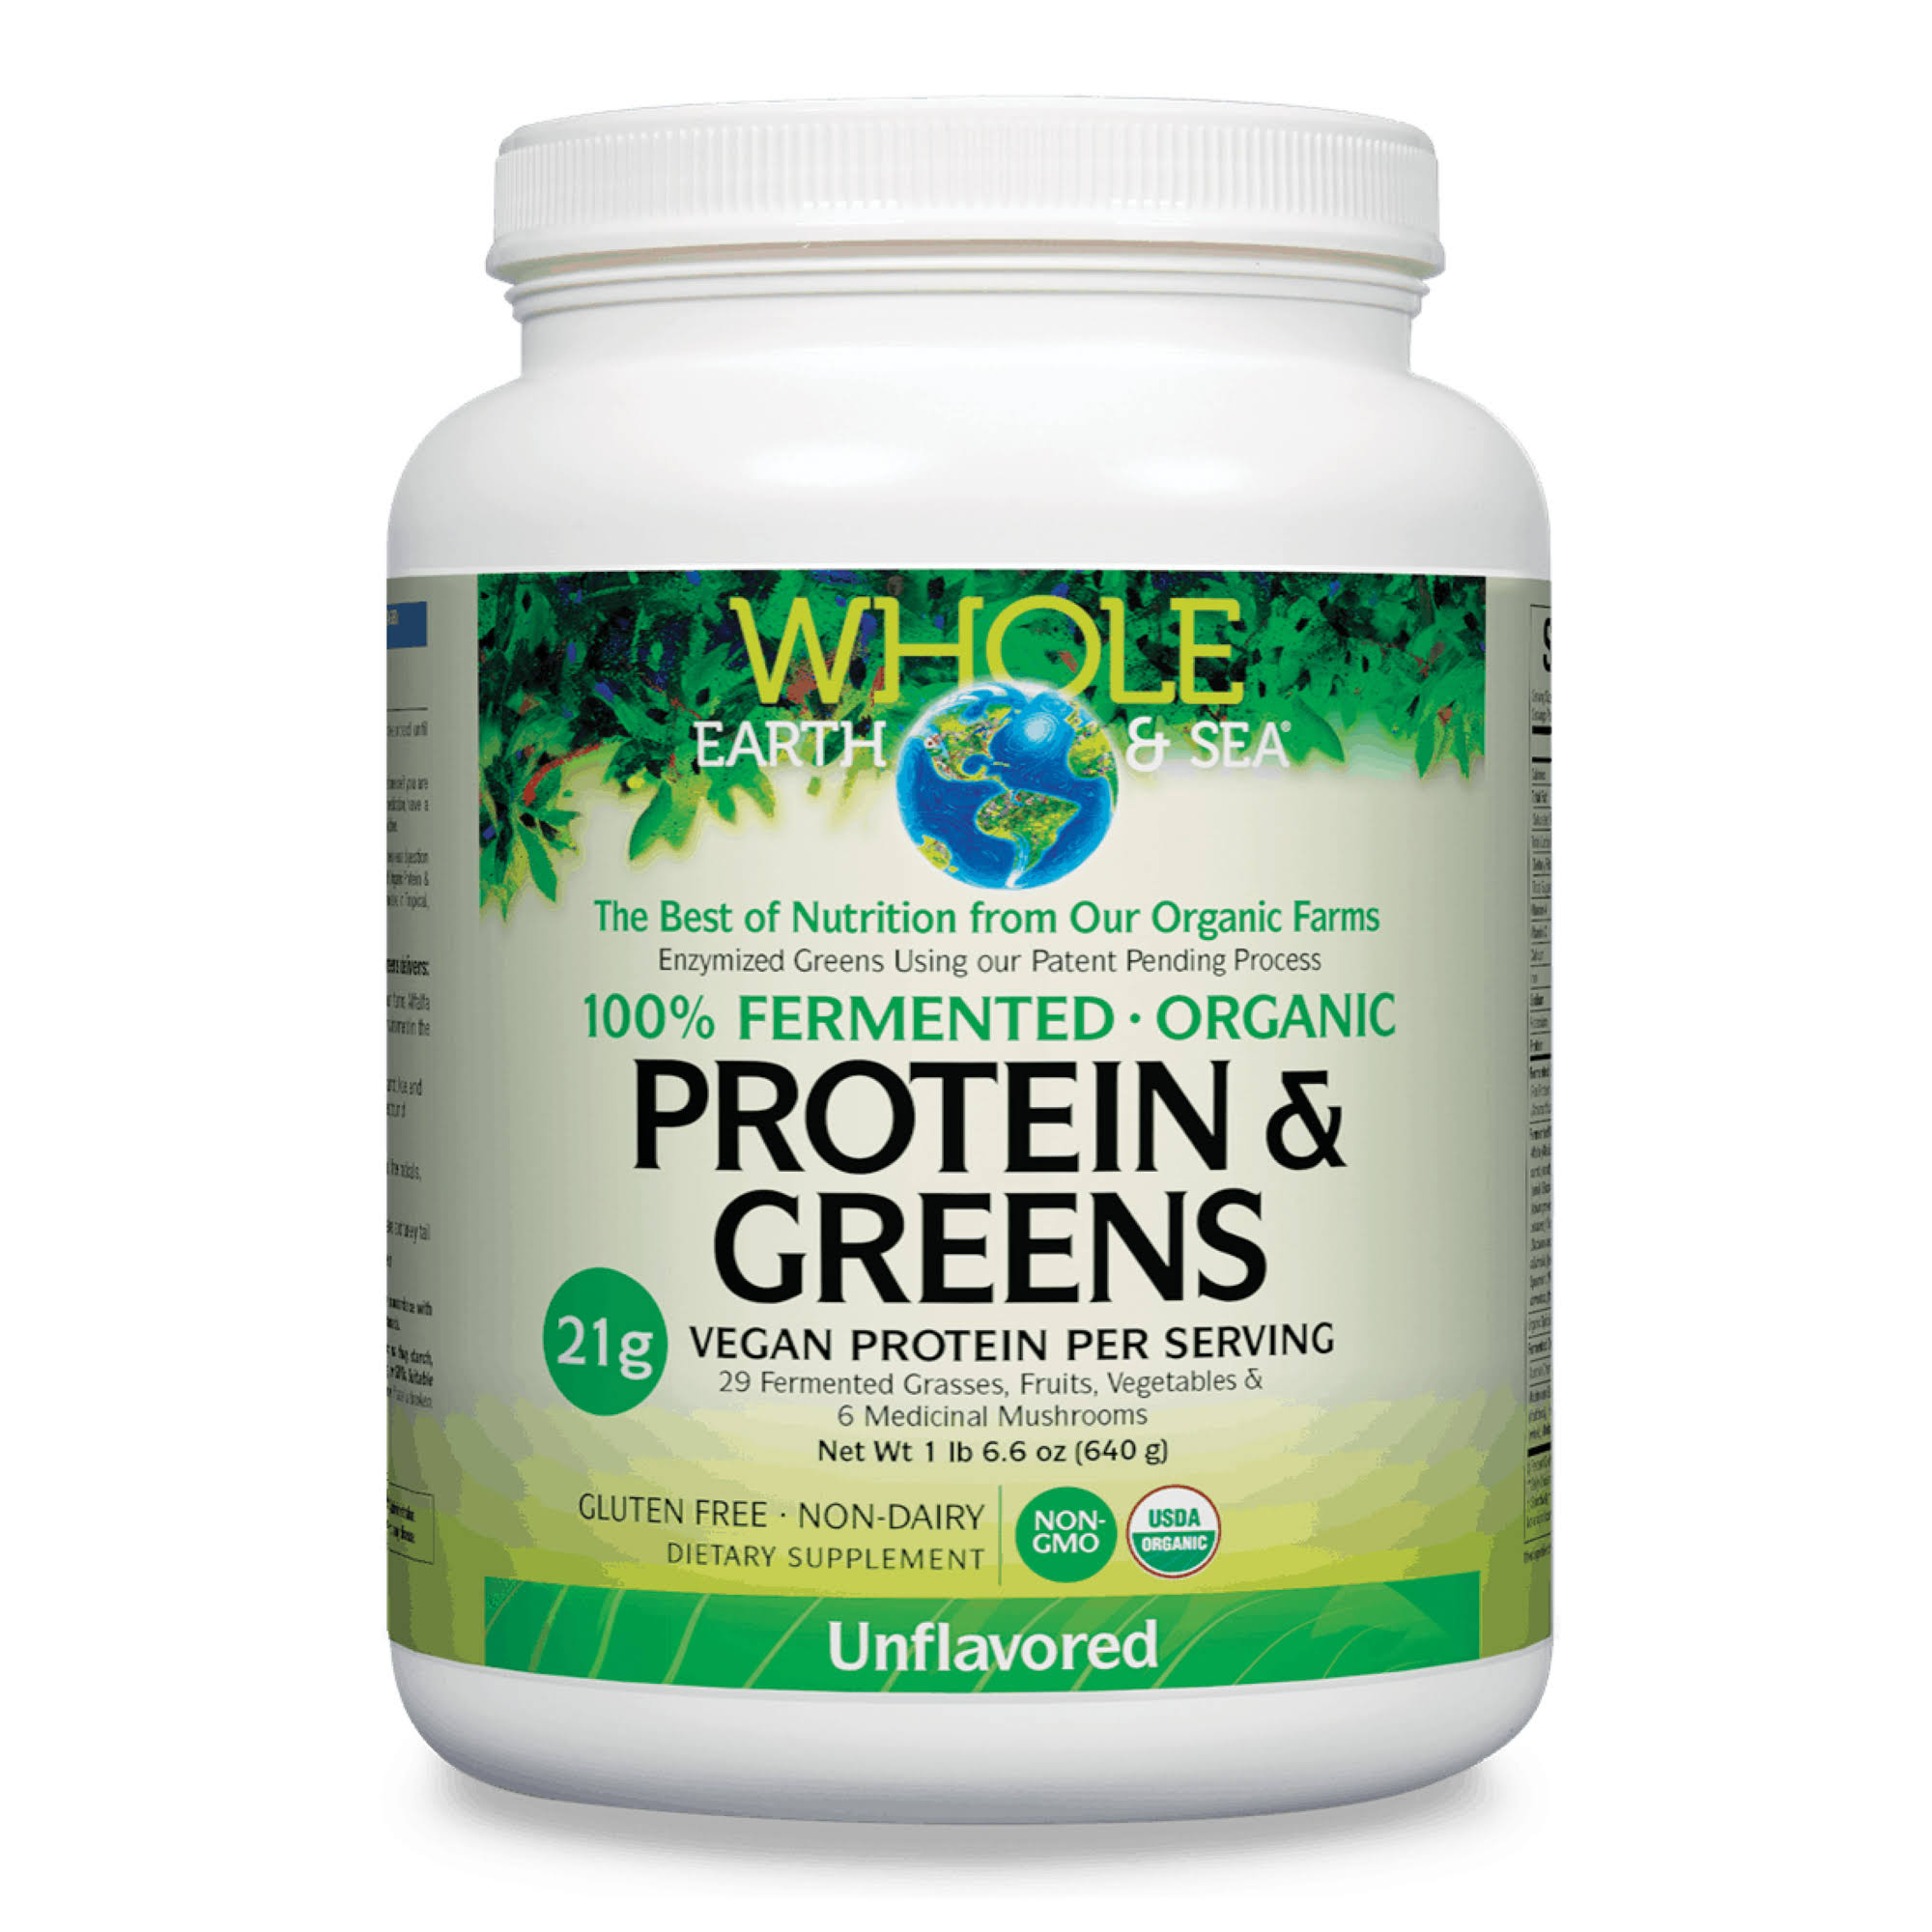 Whole Earth & Sea 100% Fermented Organic Protein & Greens Unflavored